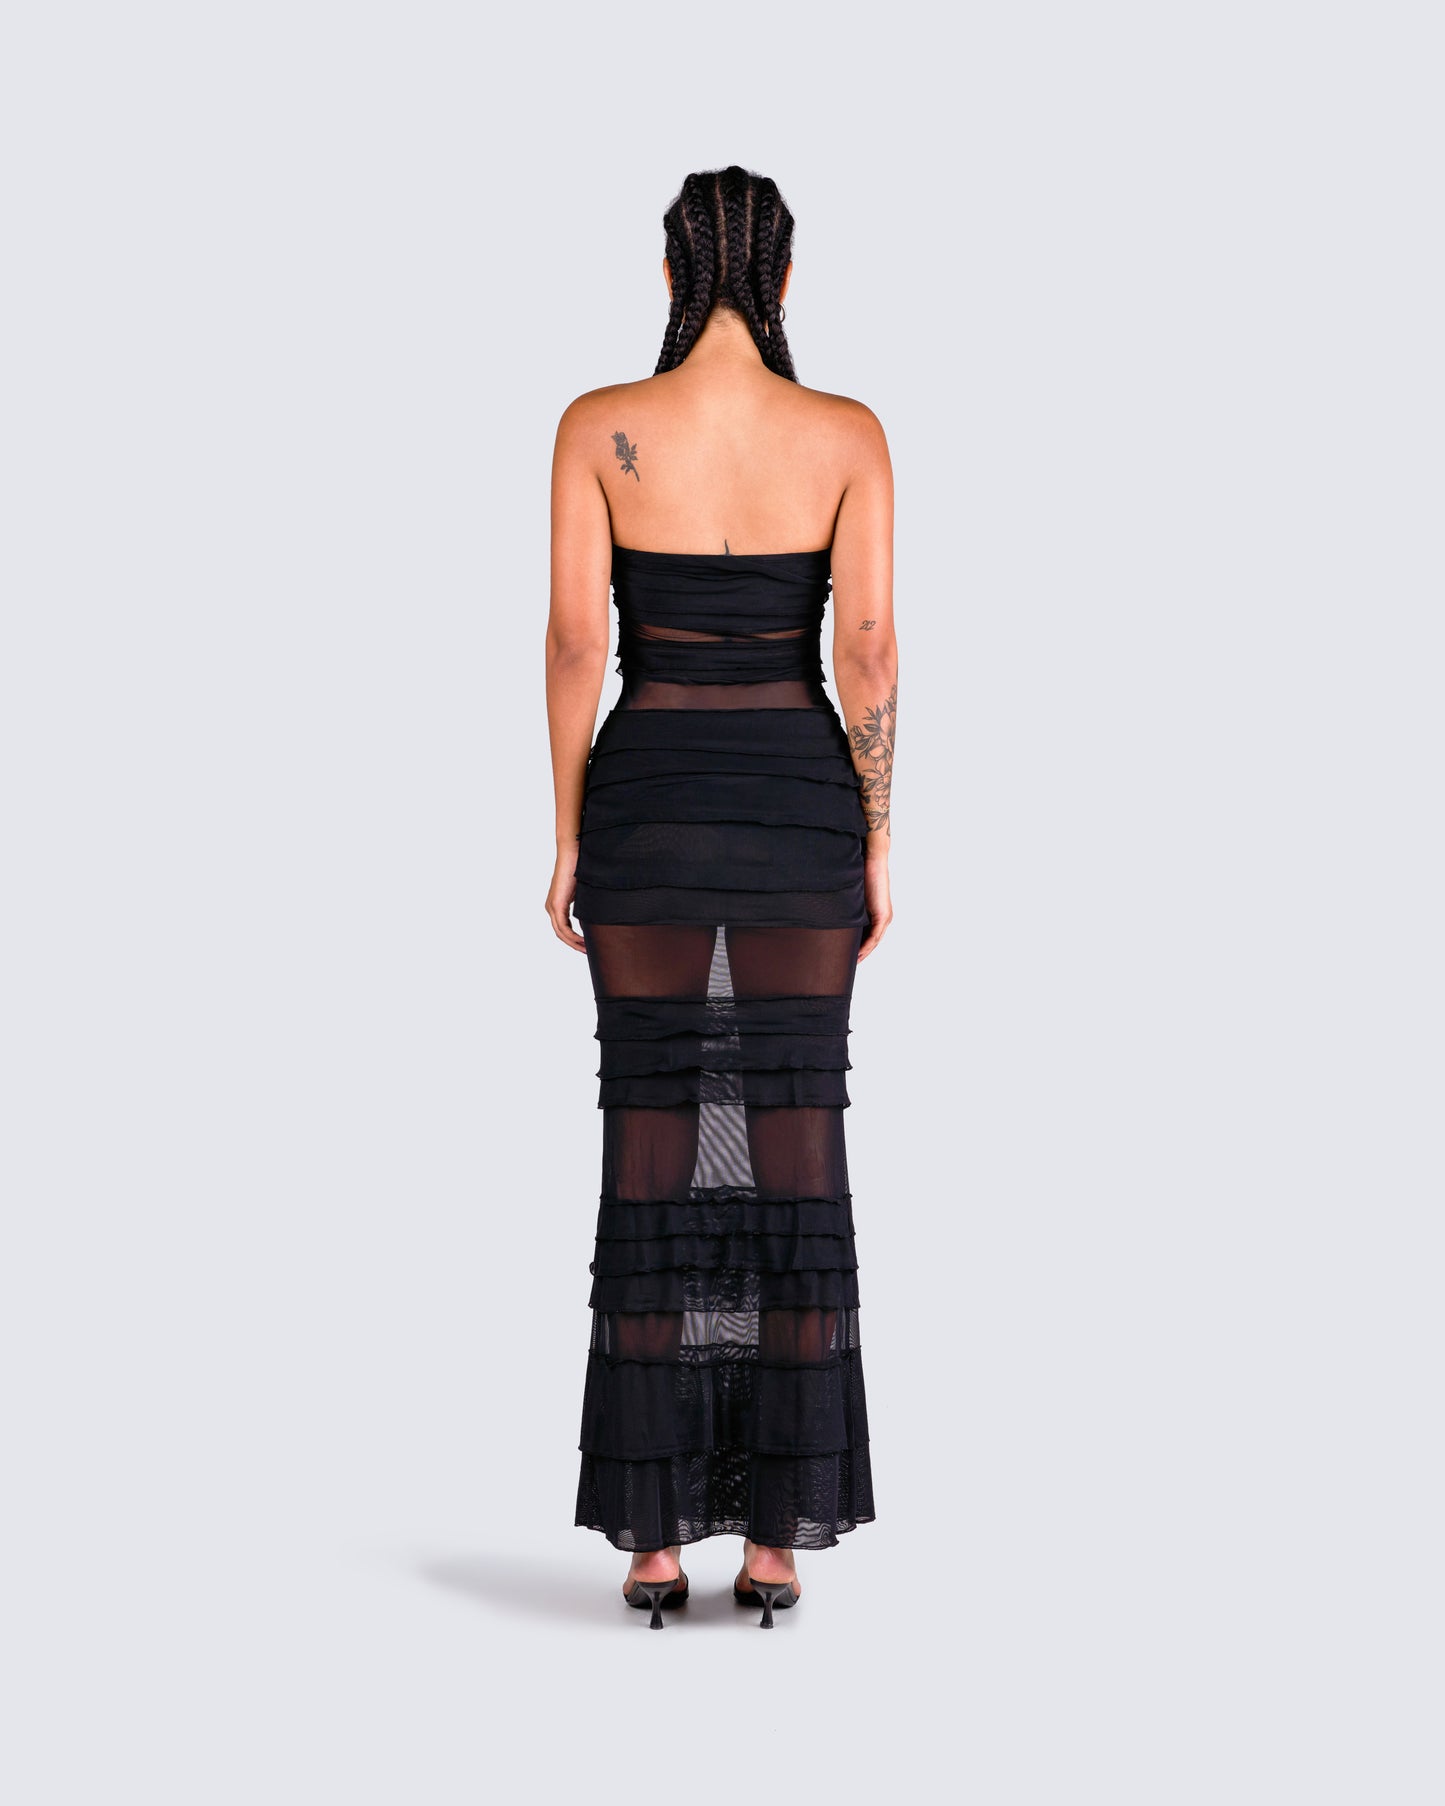 Adelaide Black Tiered Maxi Dress